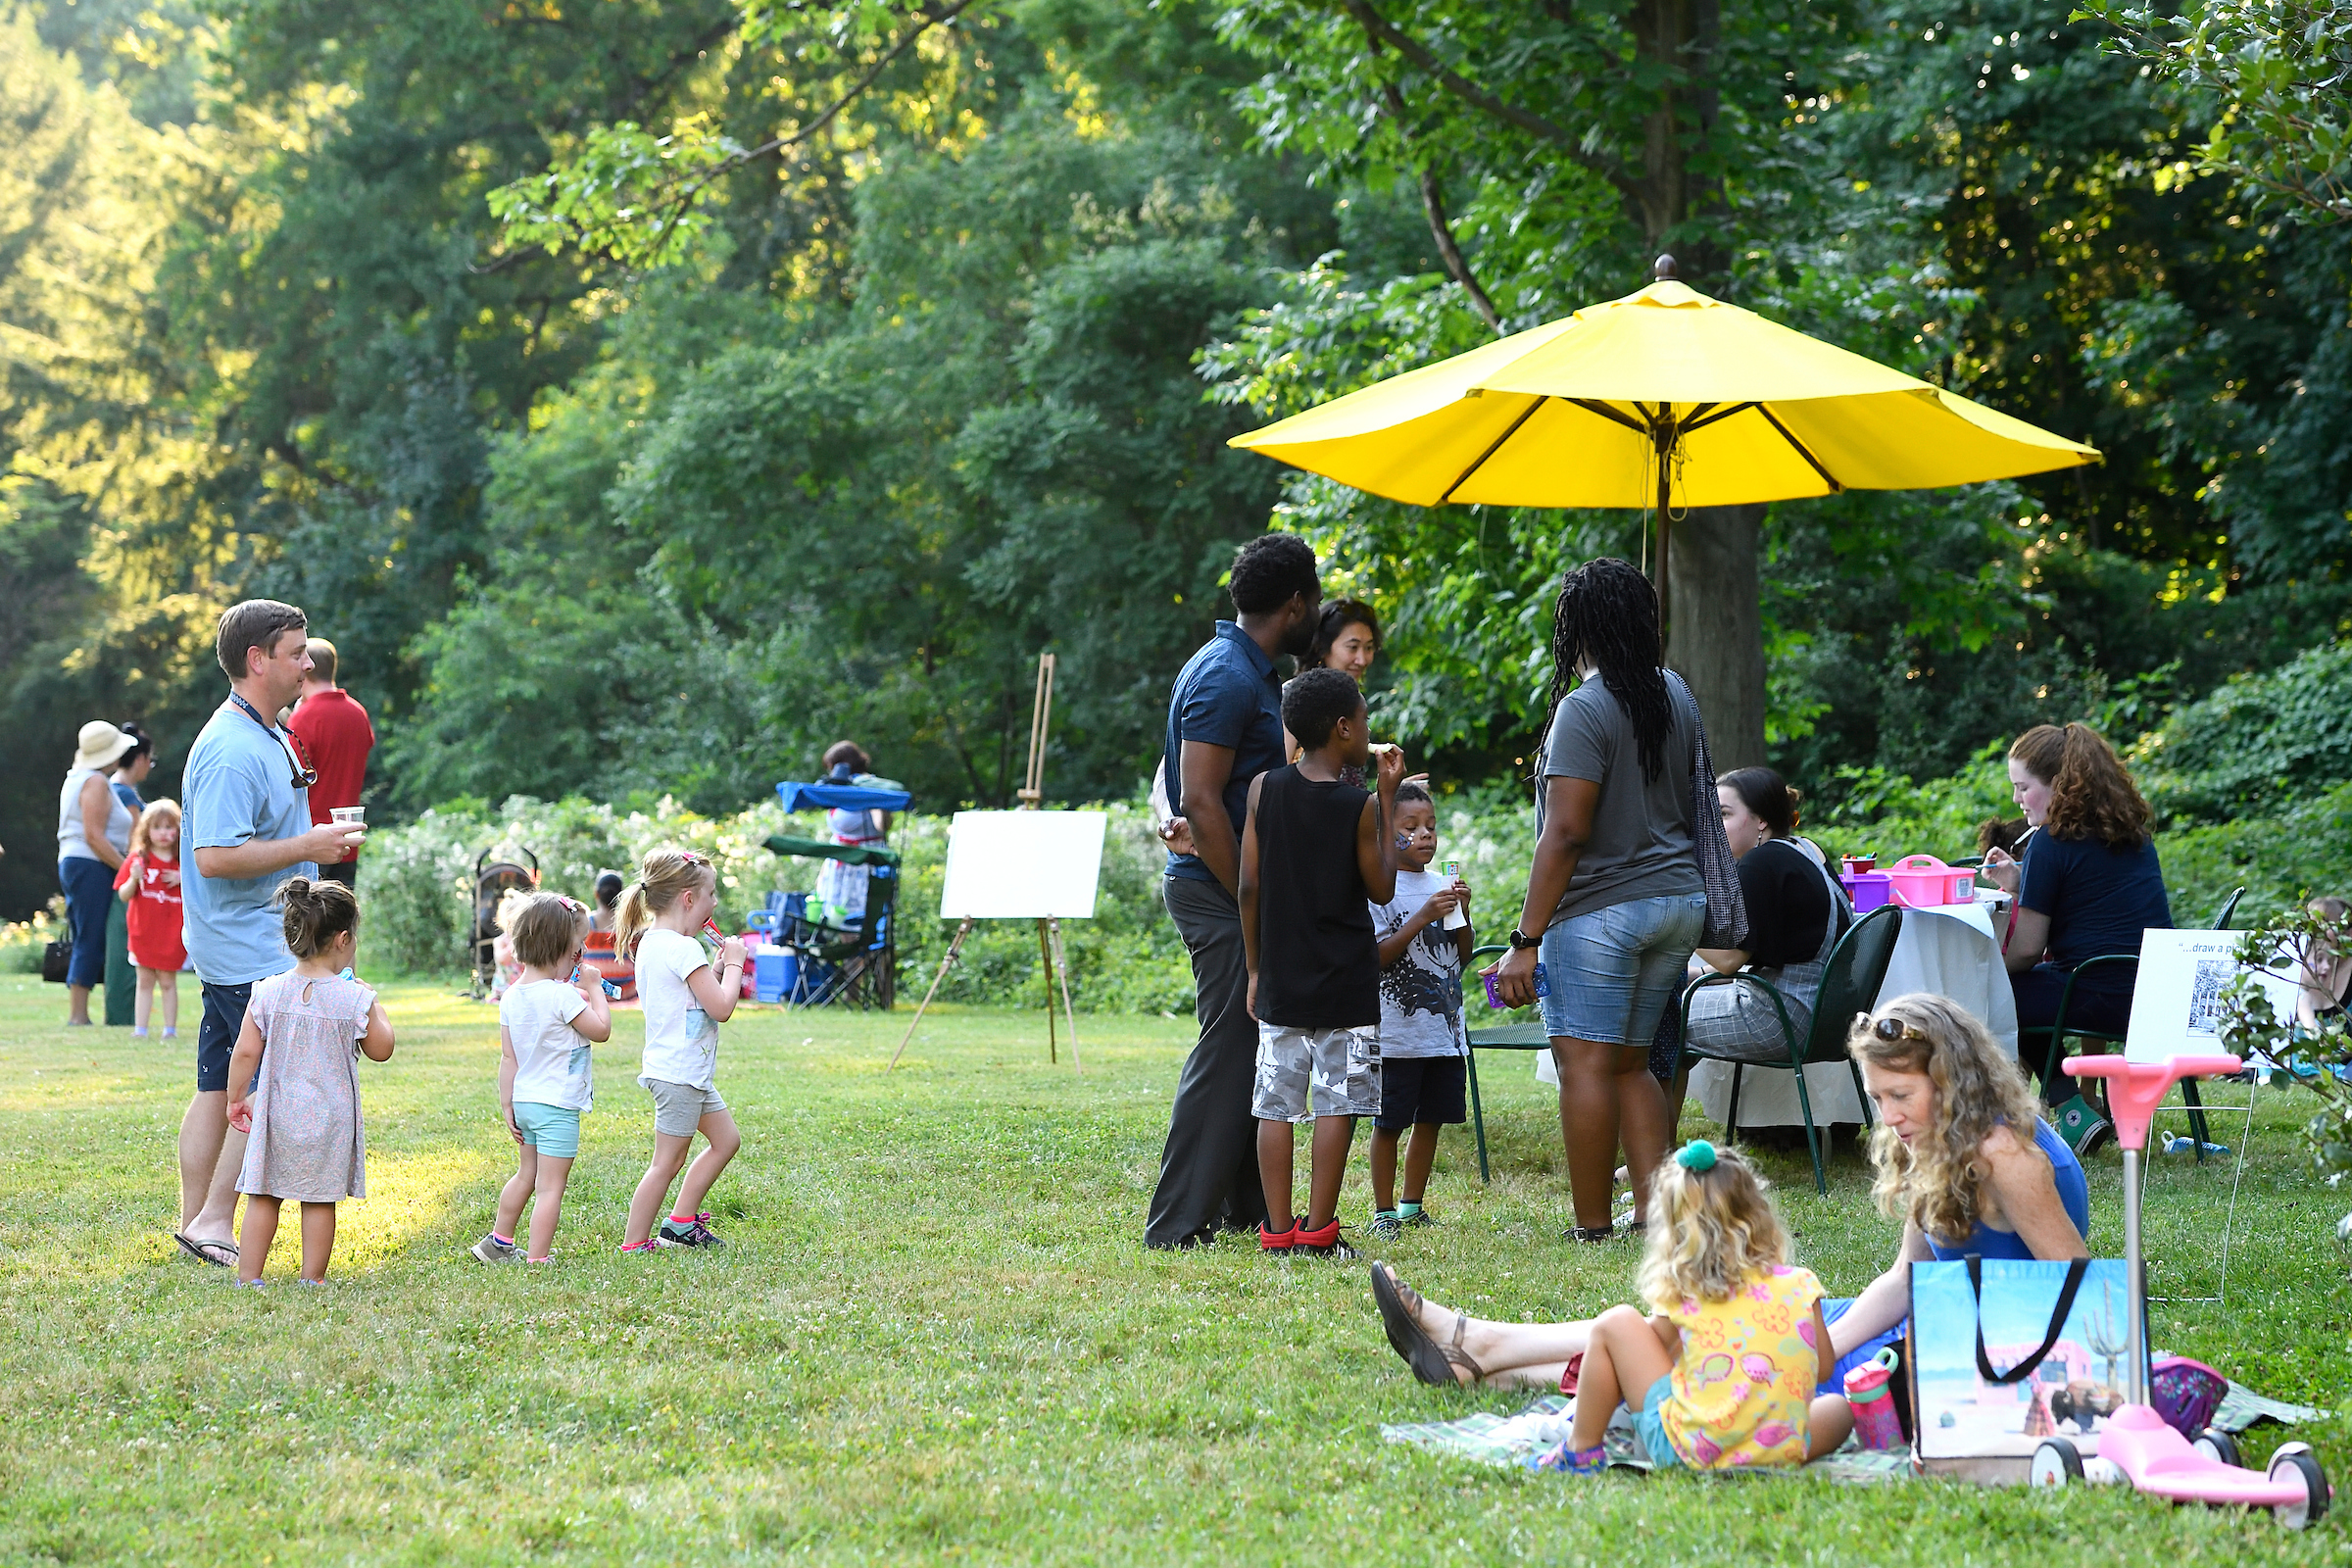 Clusters of children and adults congregate on Evergreen's front lawn. To the left, a table with chairs and a yellow umbrella is set up.